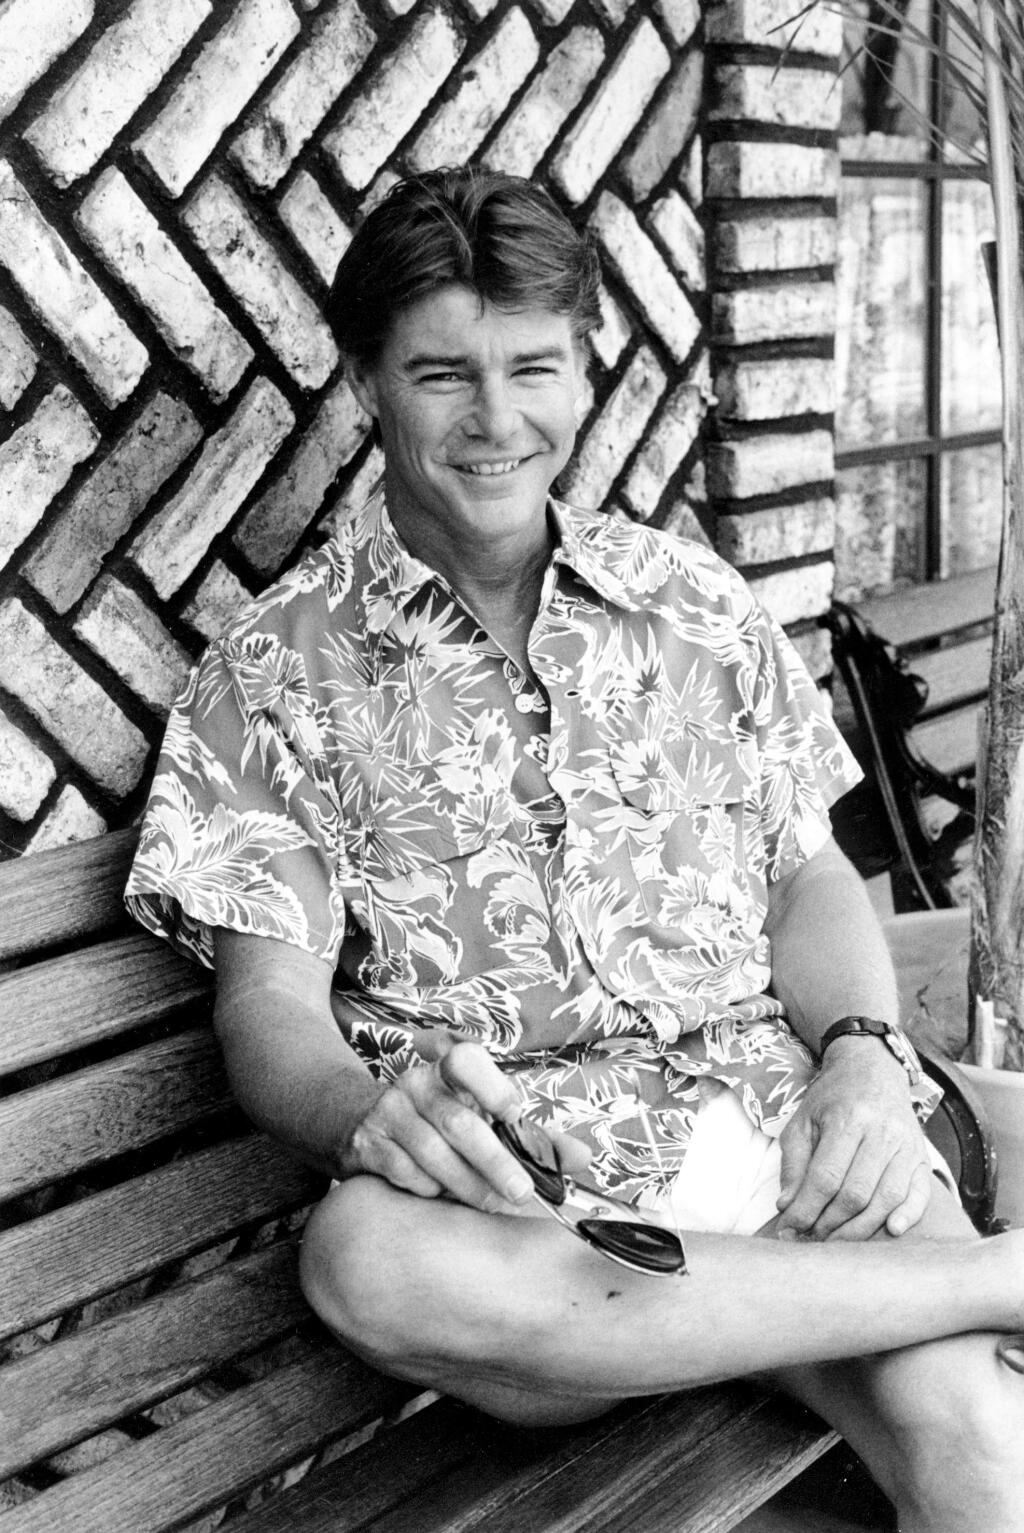 FILE - In this June 6, 1984, file photo, actor Jan-Michael Vincent poses during an interview in Hollywood, Calif. Vincent, known for starring in the television series 'Airwolf,' died Feb. 10, 2019. He was 73. (AP Photo/Wally Fong, File)